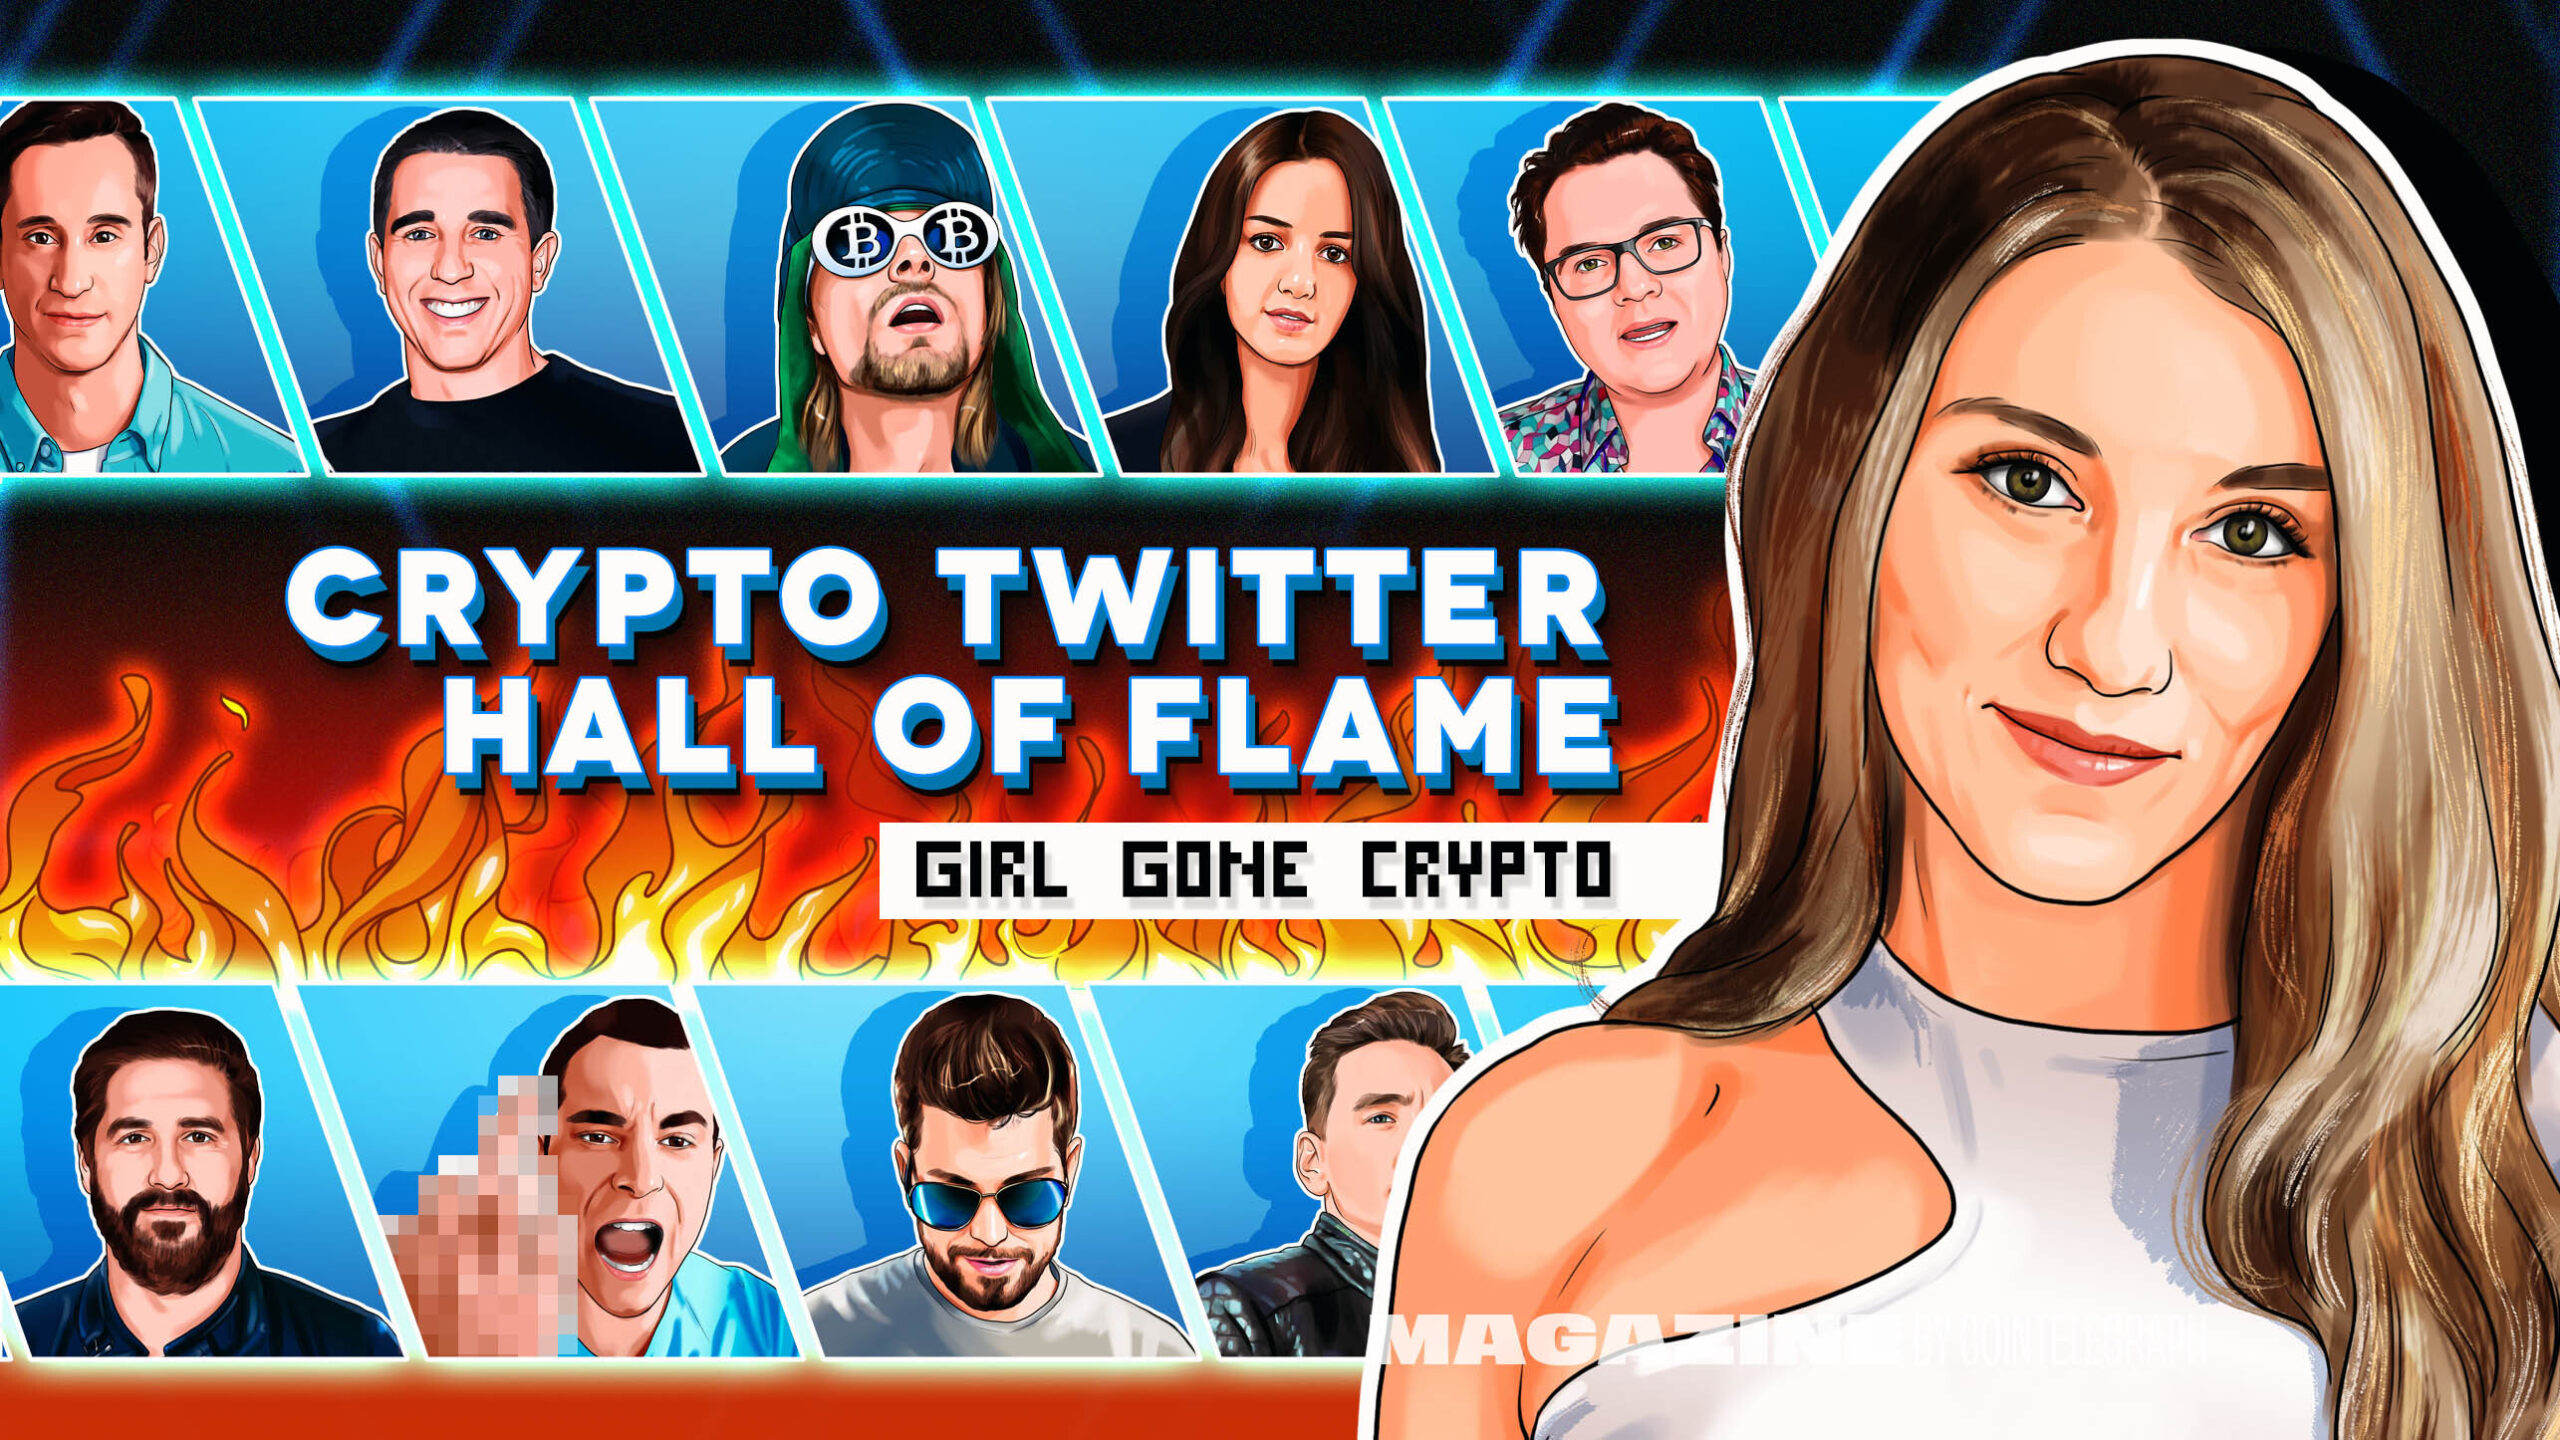 Girl-gone-crypto-thinks-‘breaking’-crypto-news-tweets-are-boring:-hall-of-flame